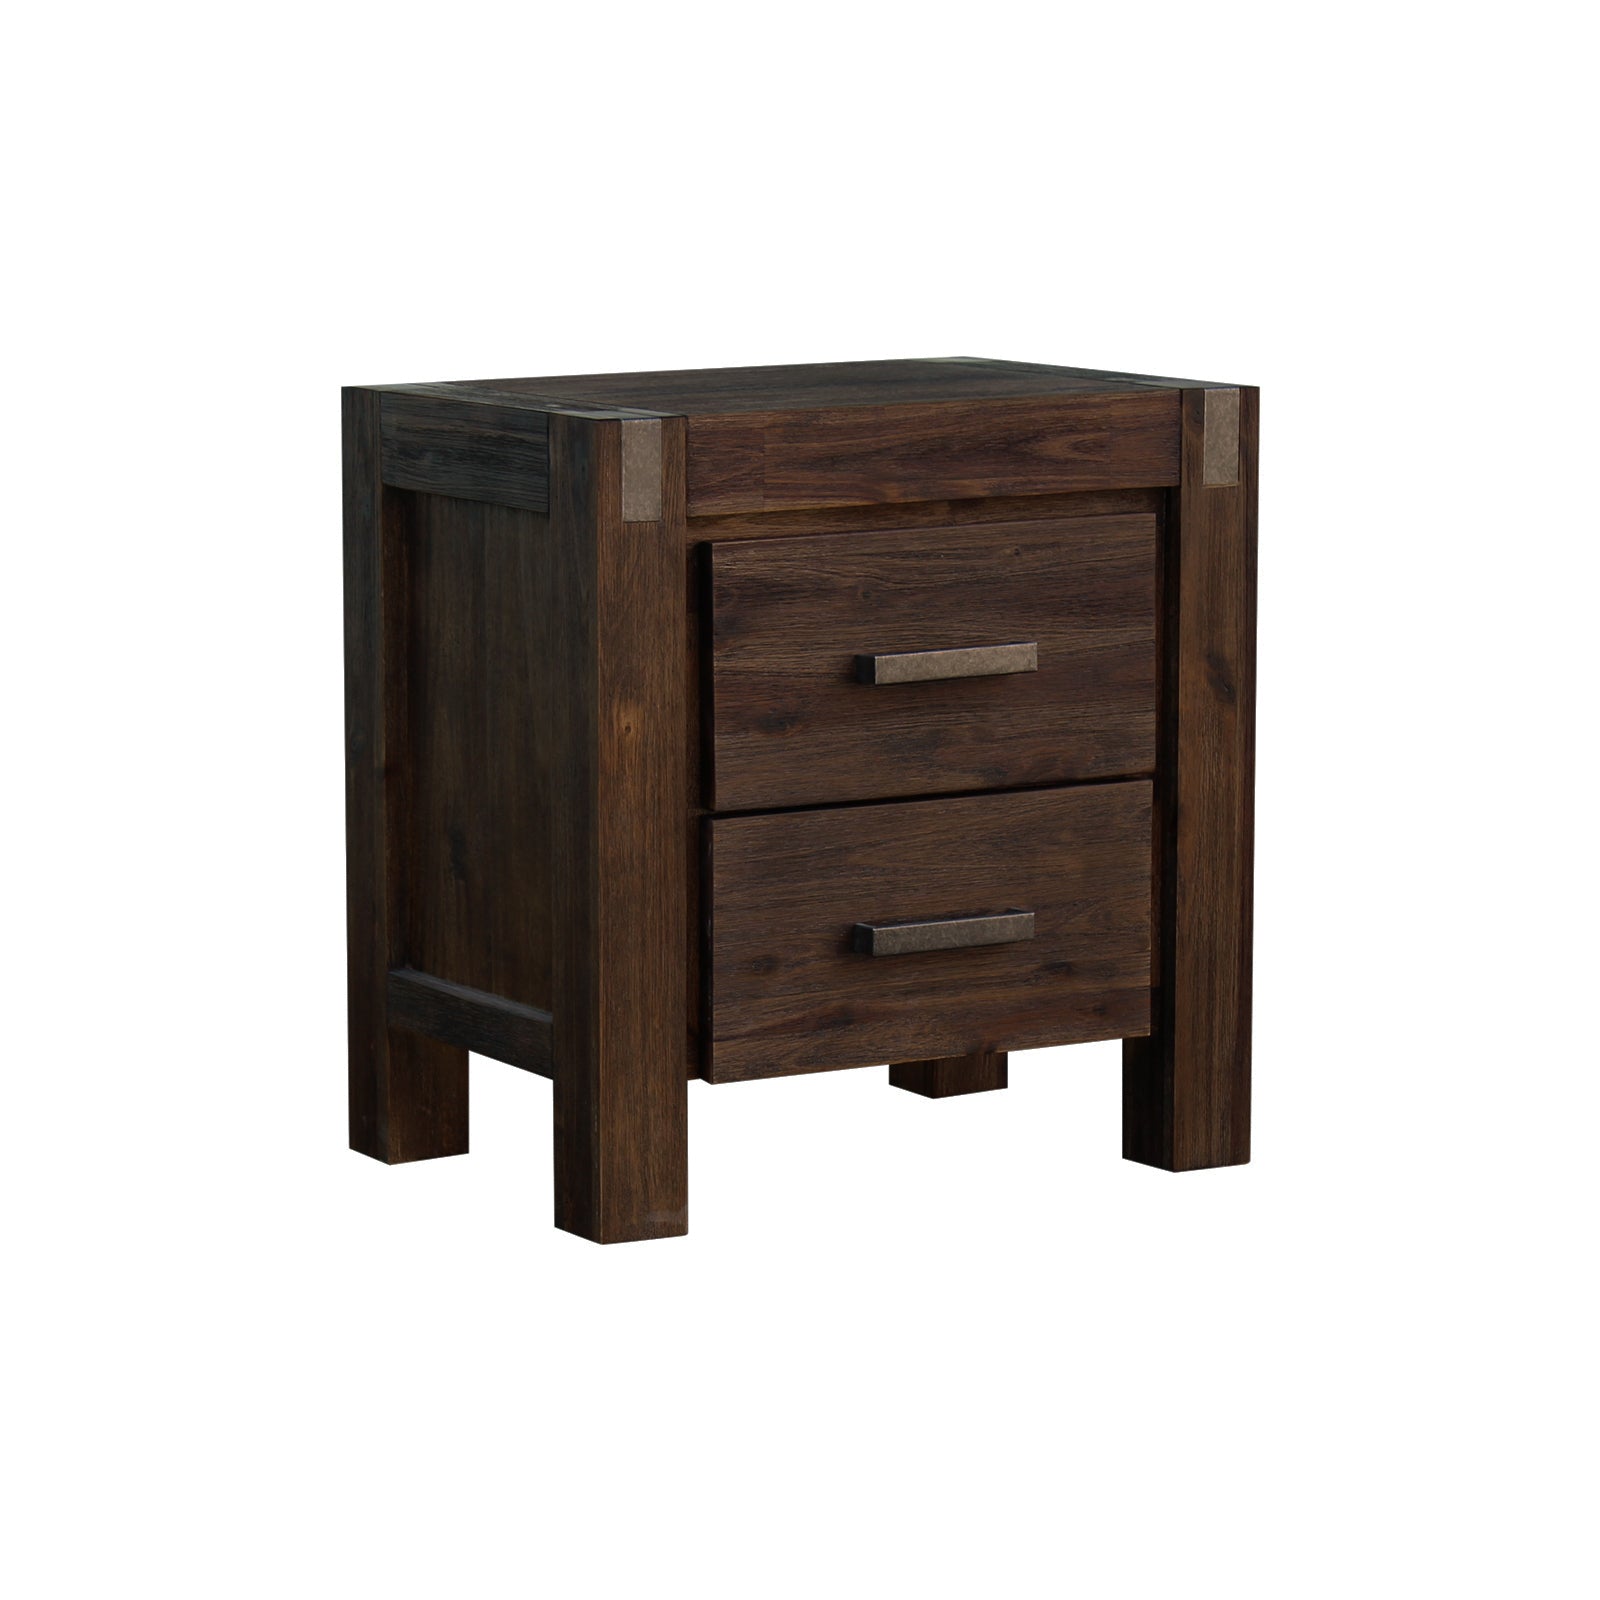 Bedside Table 2 drawers Night Stand Solid Wood Acacia Storage in Chocolate Colour - 0